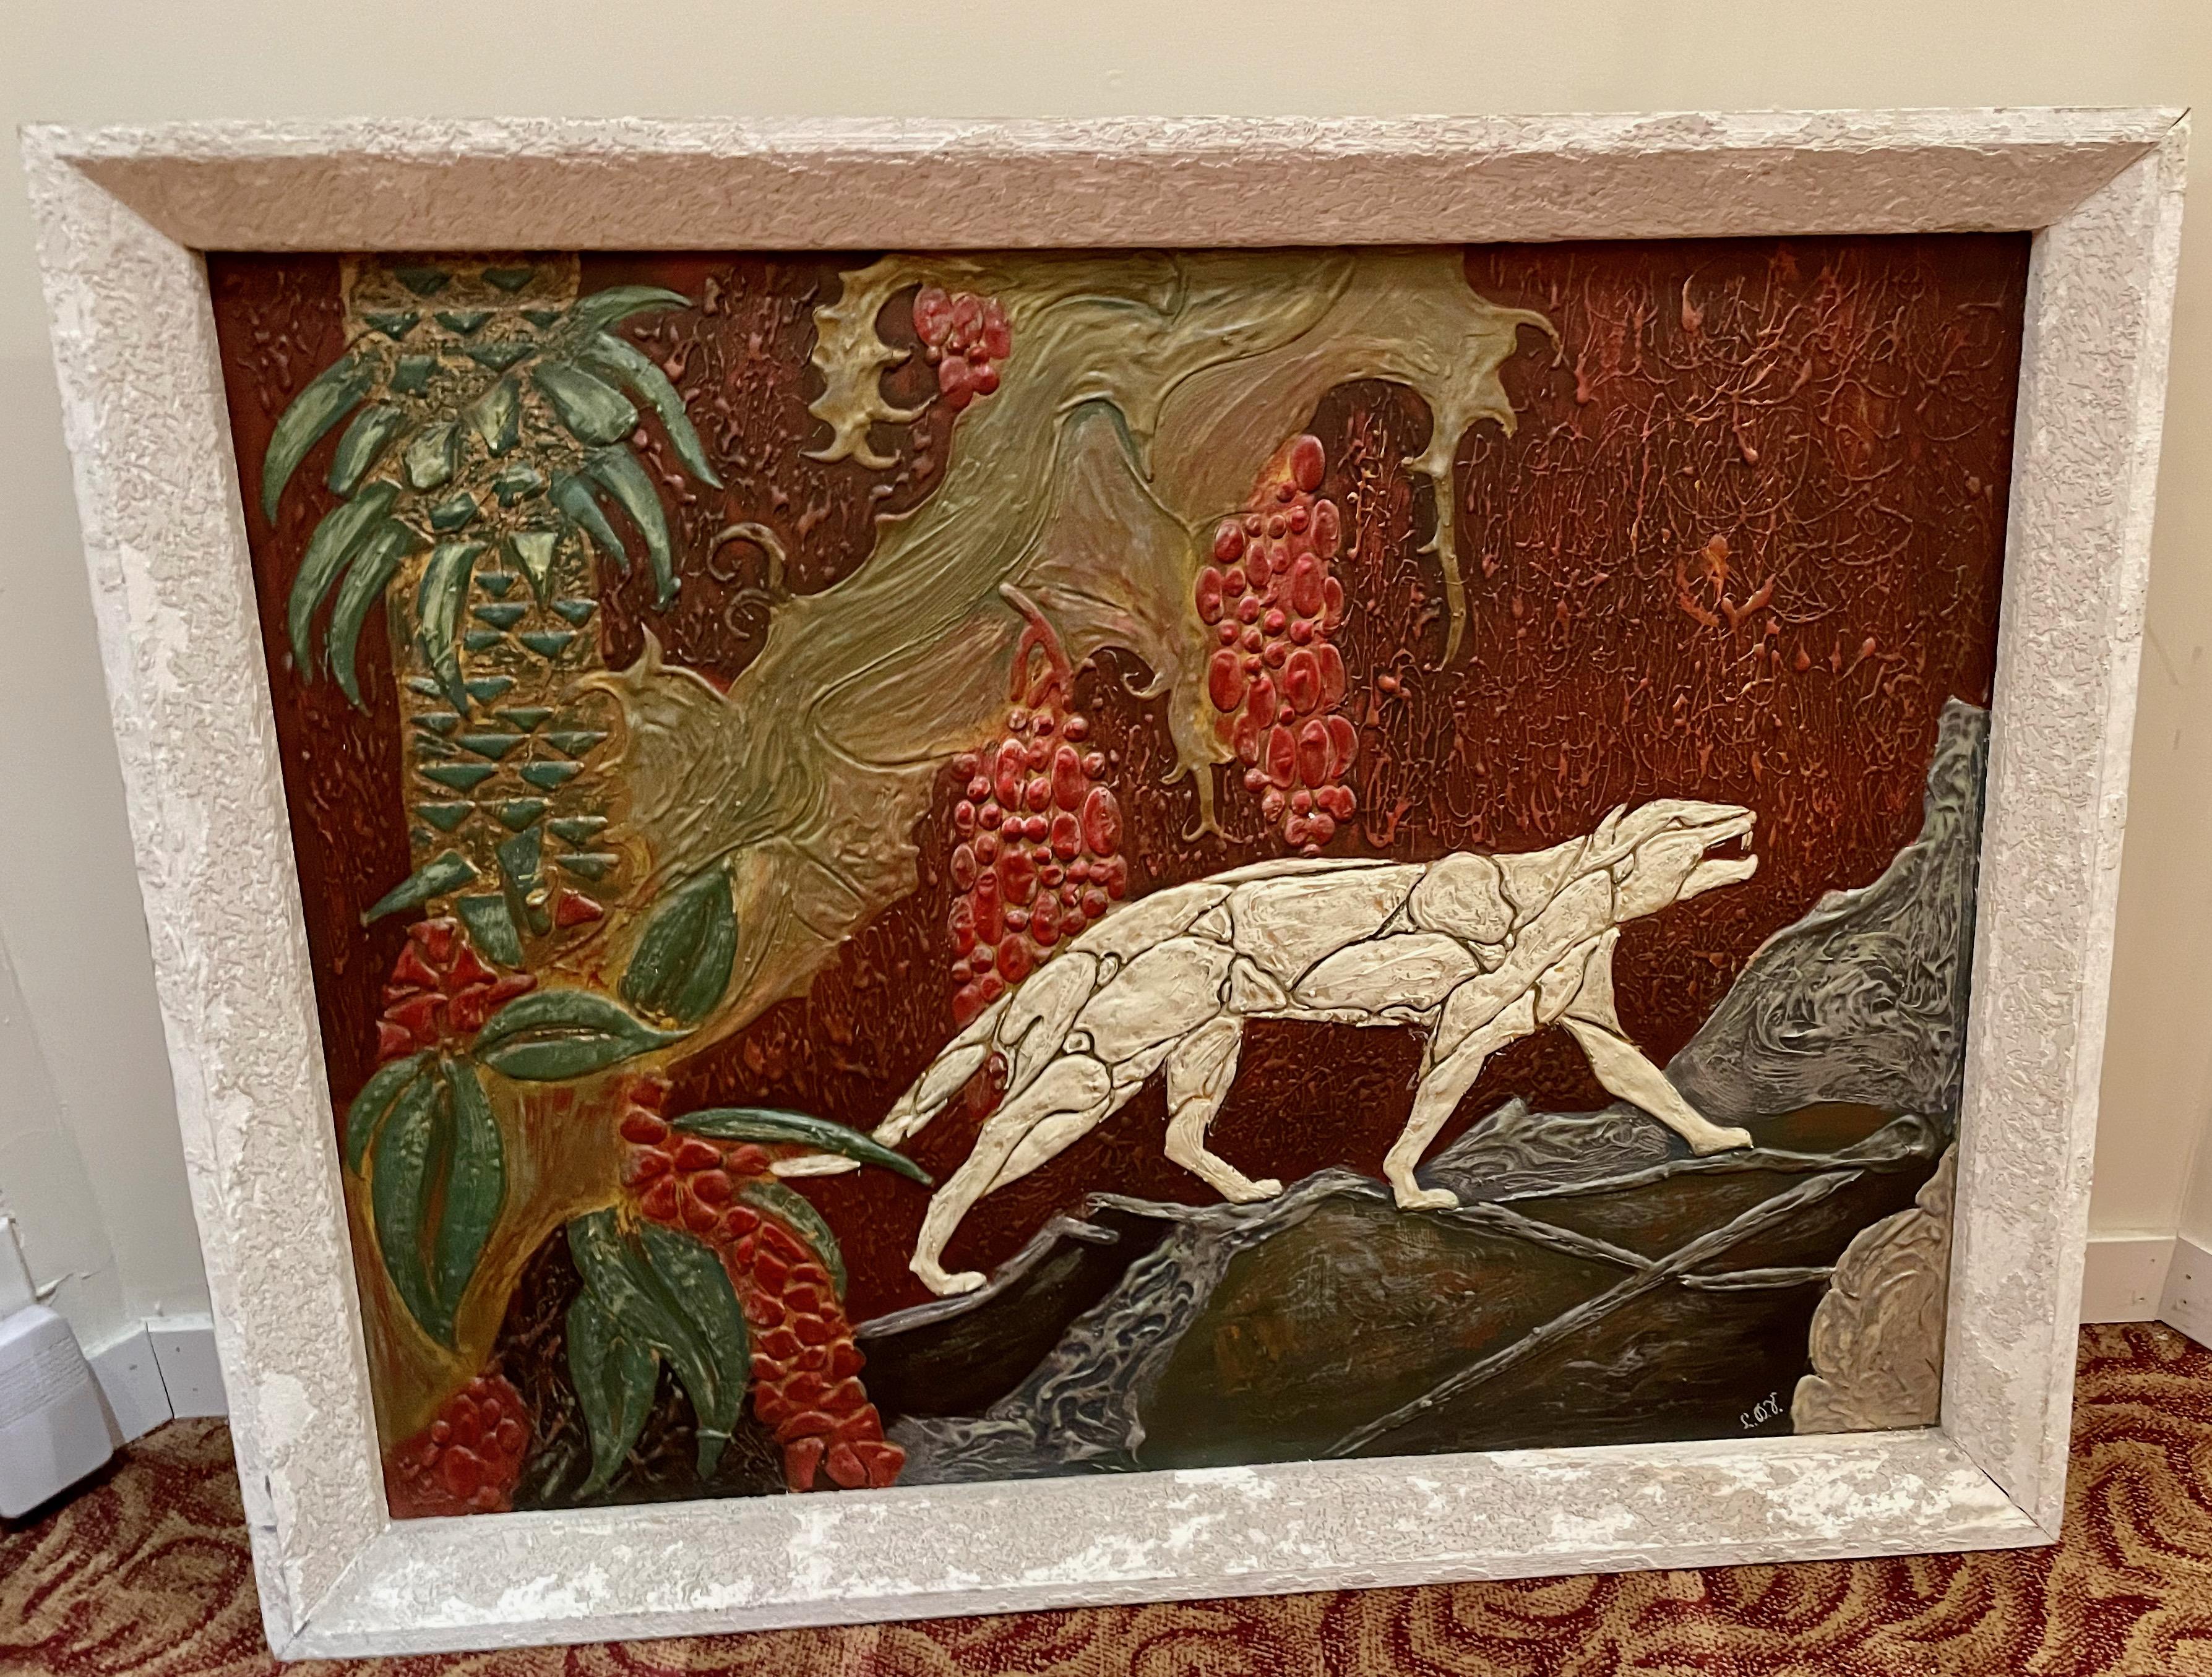 Art Deco painting depicting panther in the wild. Unusual dimensional treatment with all the paint. Look closely at the texture of this piece. In an original frame that also has a painted finish. It appears to all be painted on a board that is